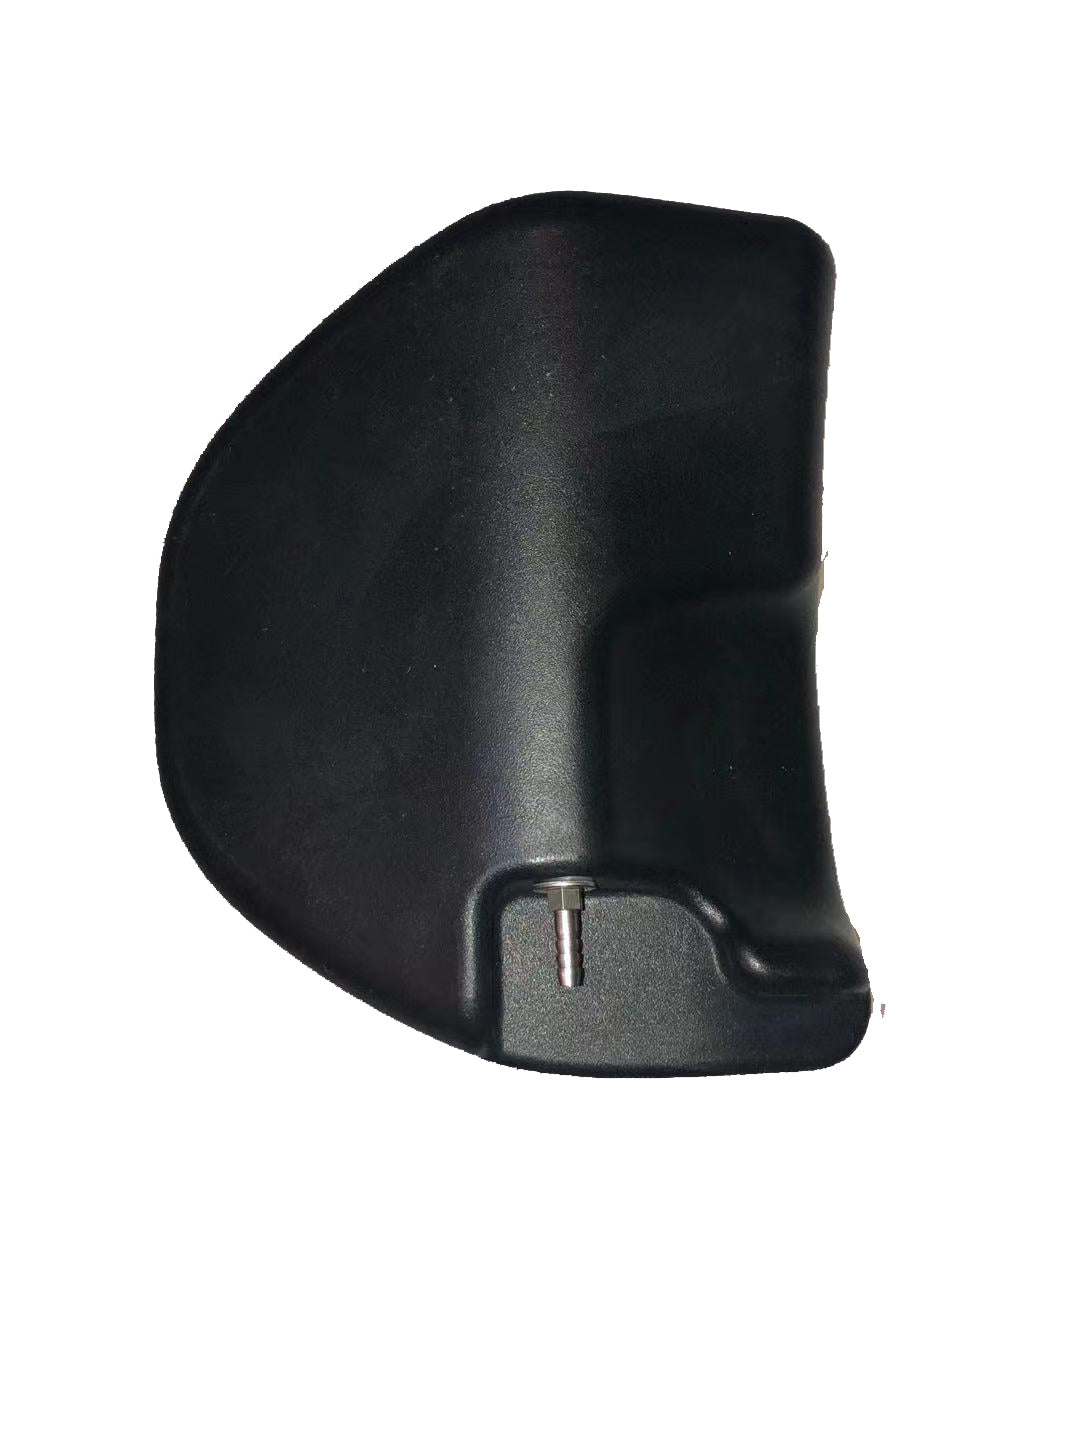 Vespa Motorcycle Auxiliary Fuel Tank Made of PE Material for 150/300 (9x7x8.6 inches, 6L) Year 2019 above